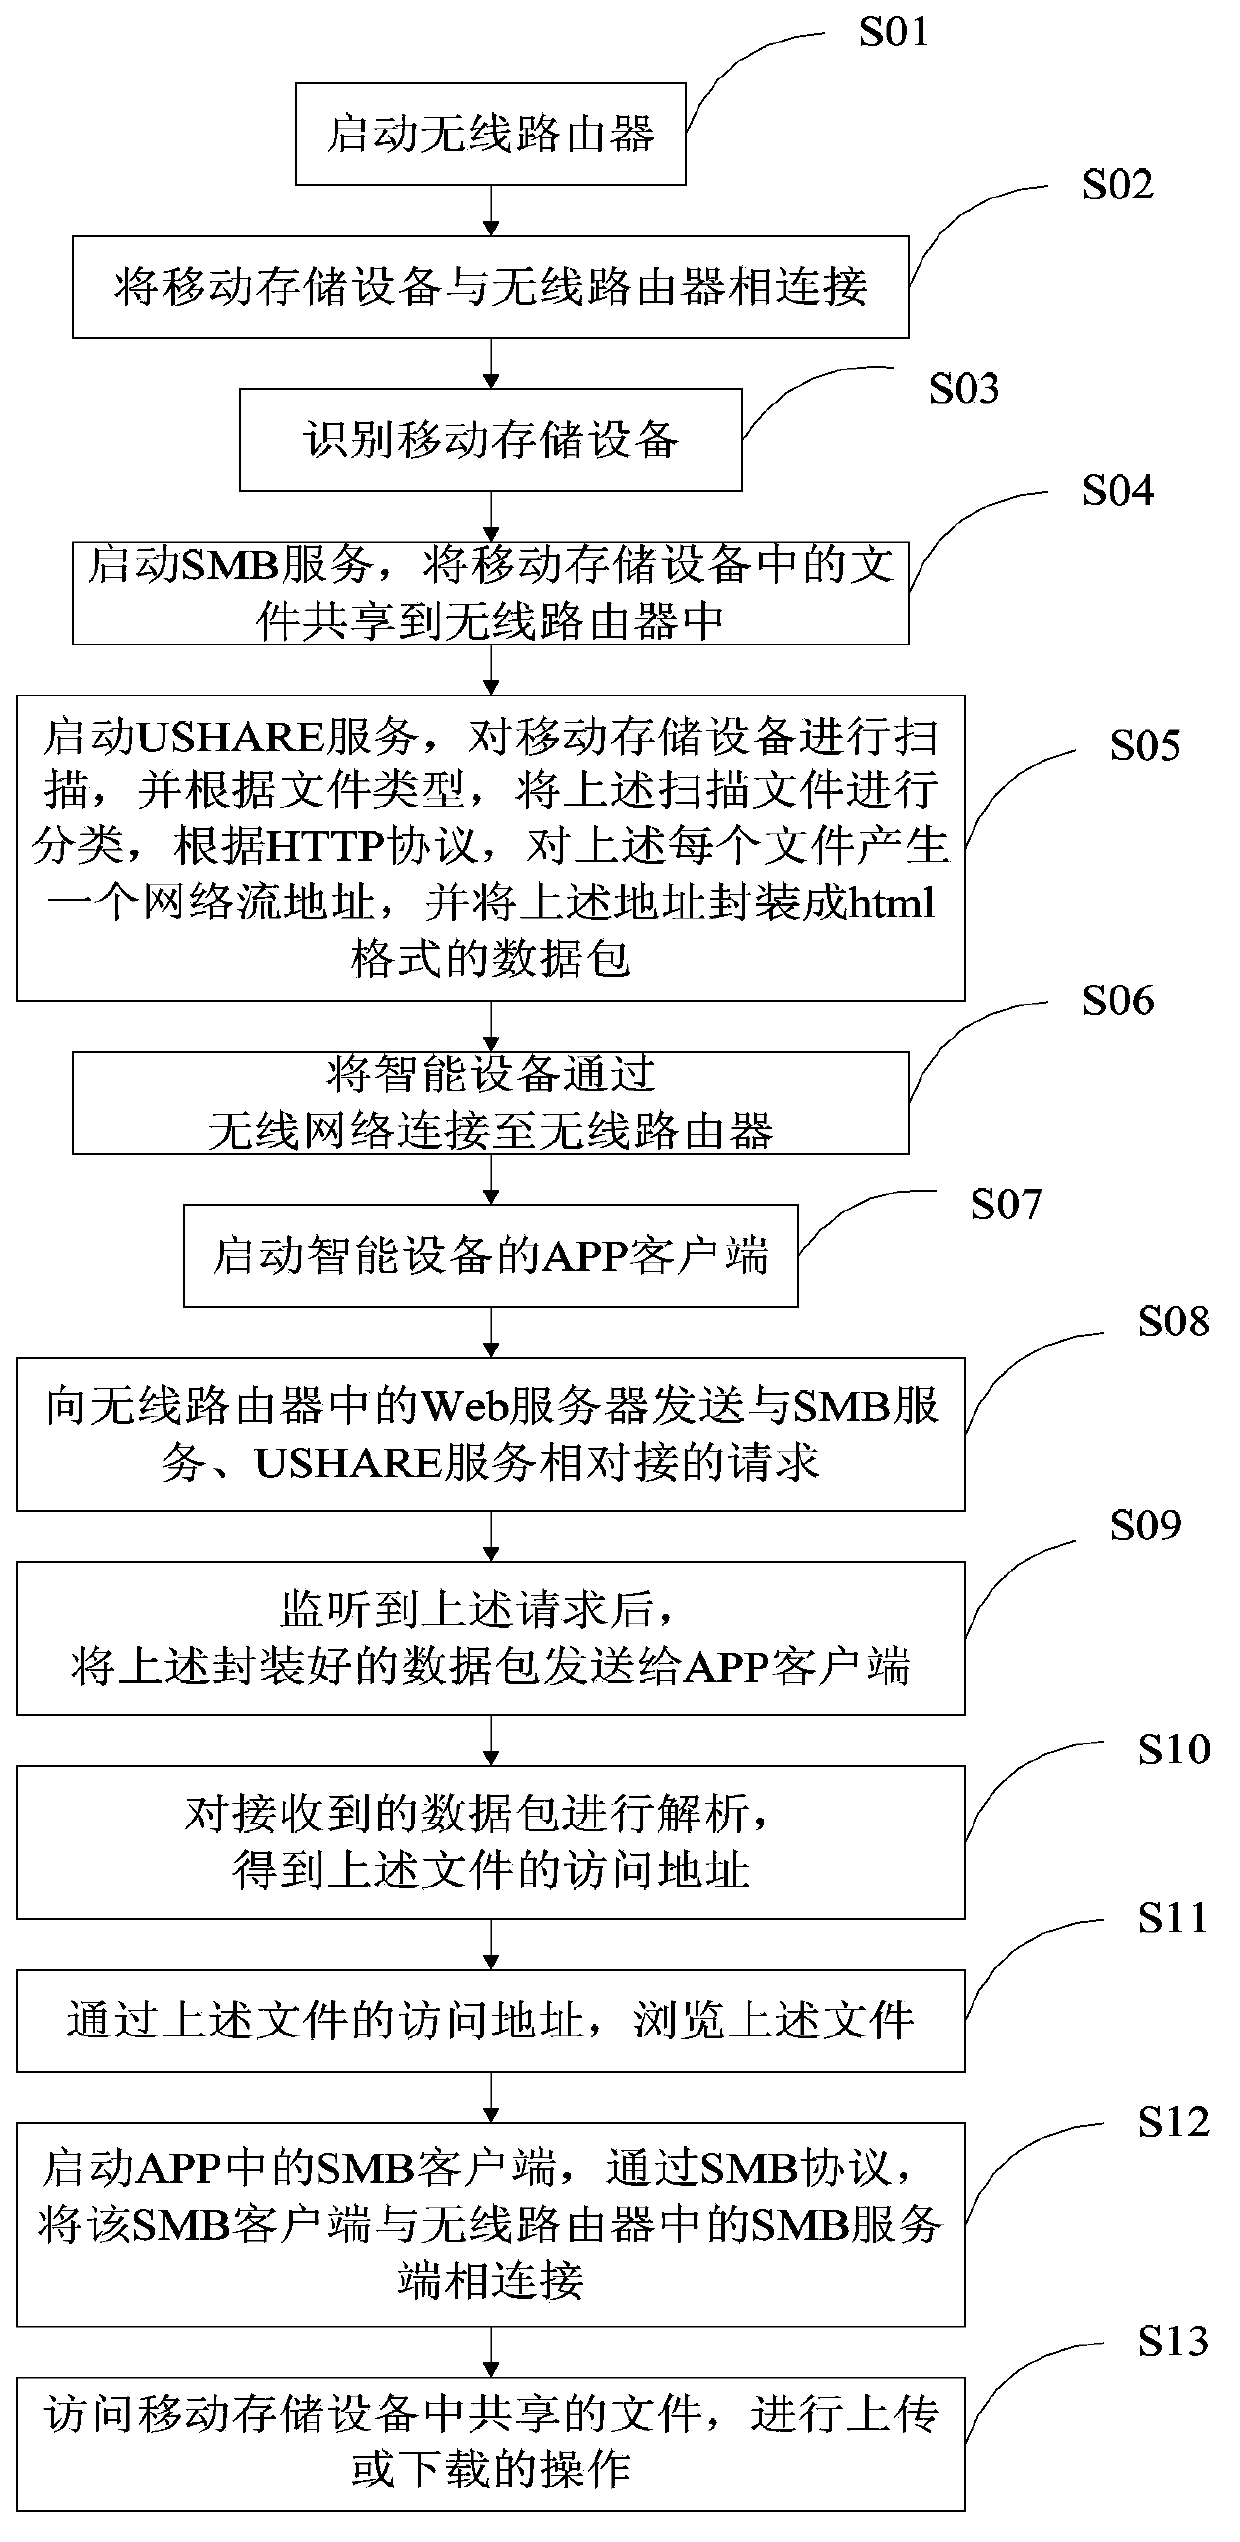 Method for accessing removable storage devices in physical connection with wireless routers through intelligent devices in wireless connection with wireless routers